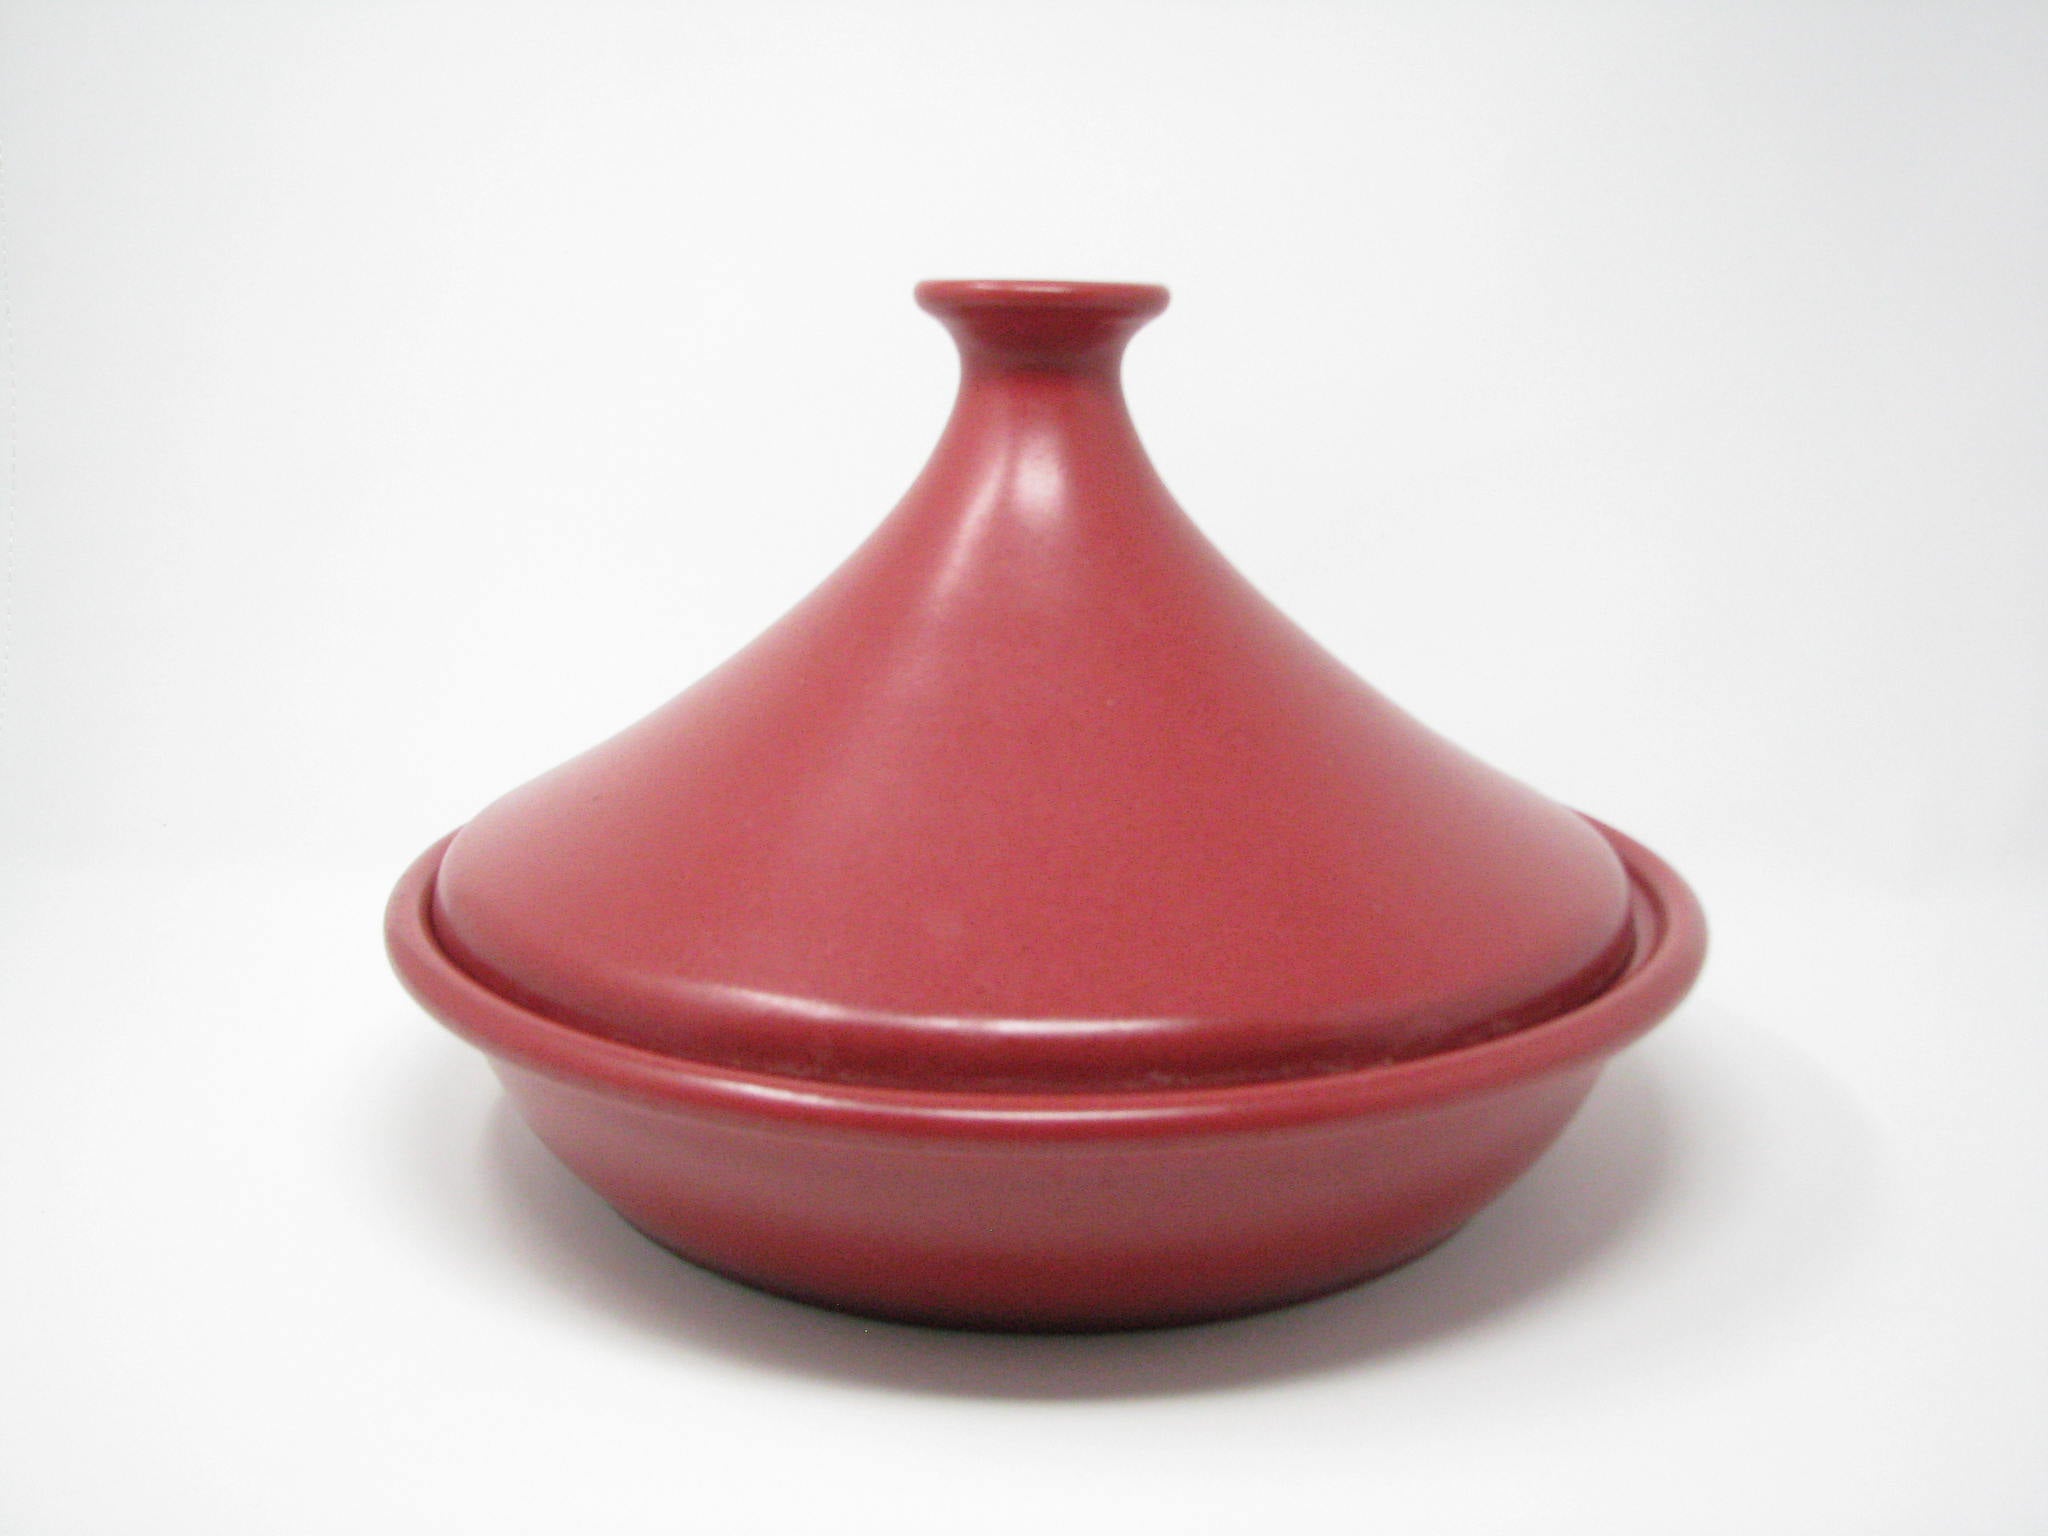 edgebrookhouse - Early Emile Henry France Flame Red Ceramic Tagine